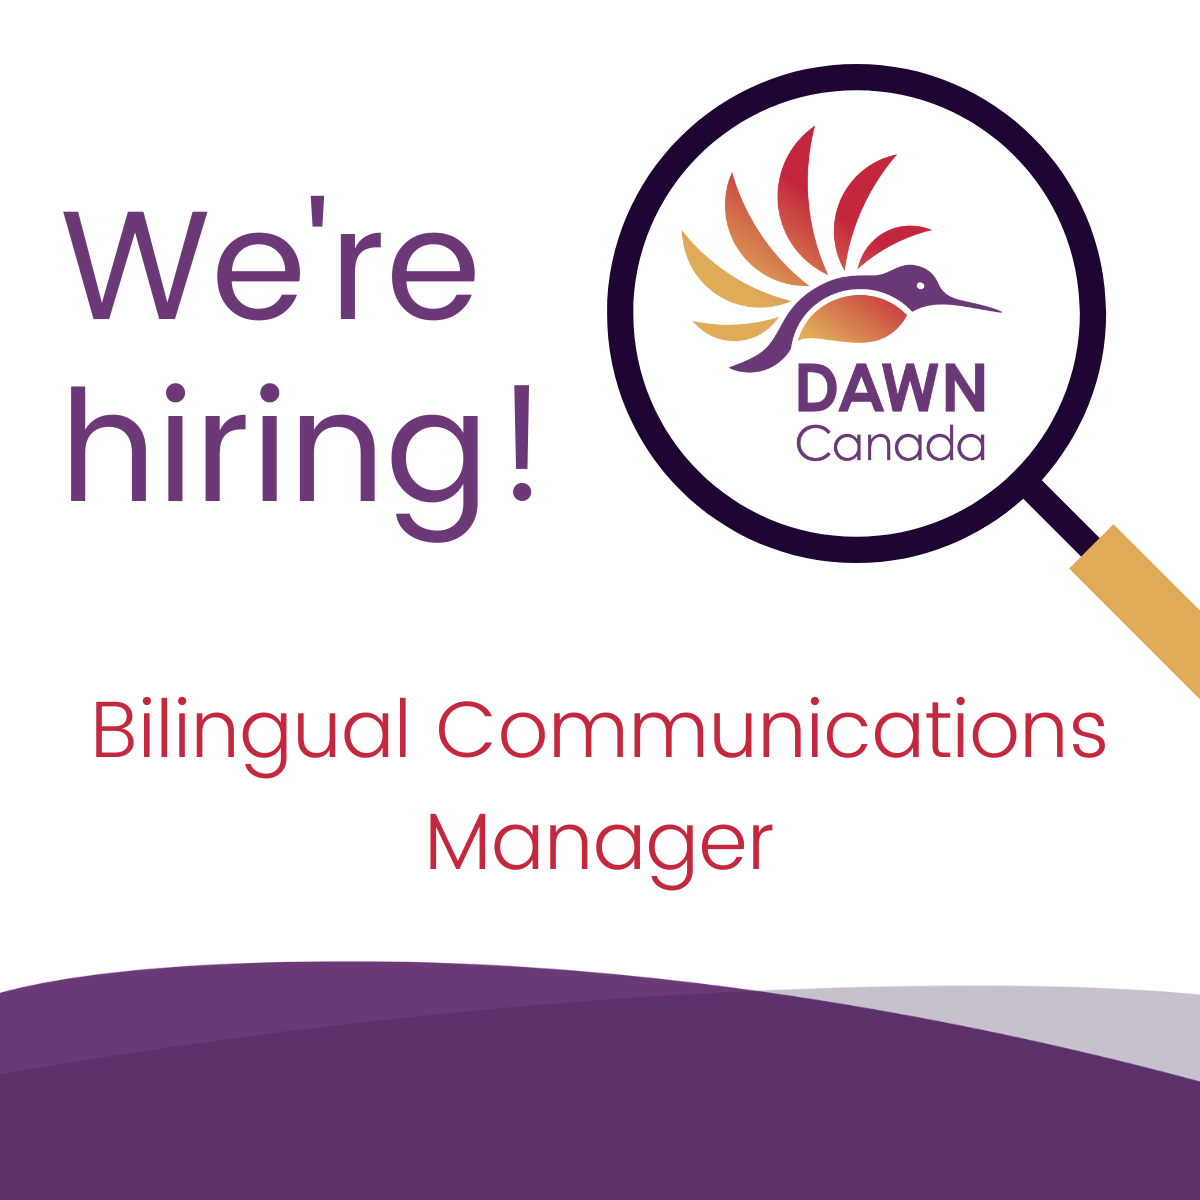 Communications Manager